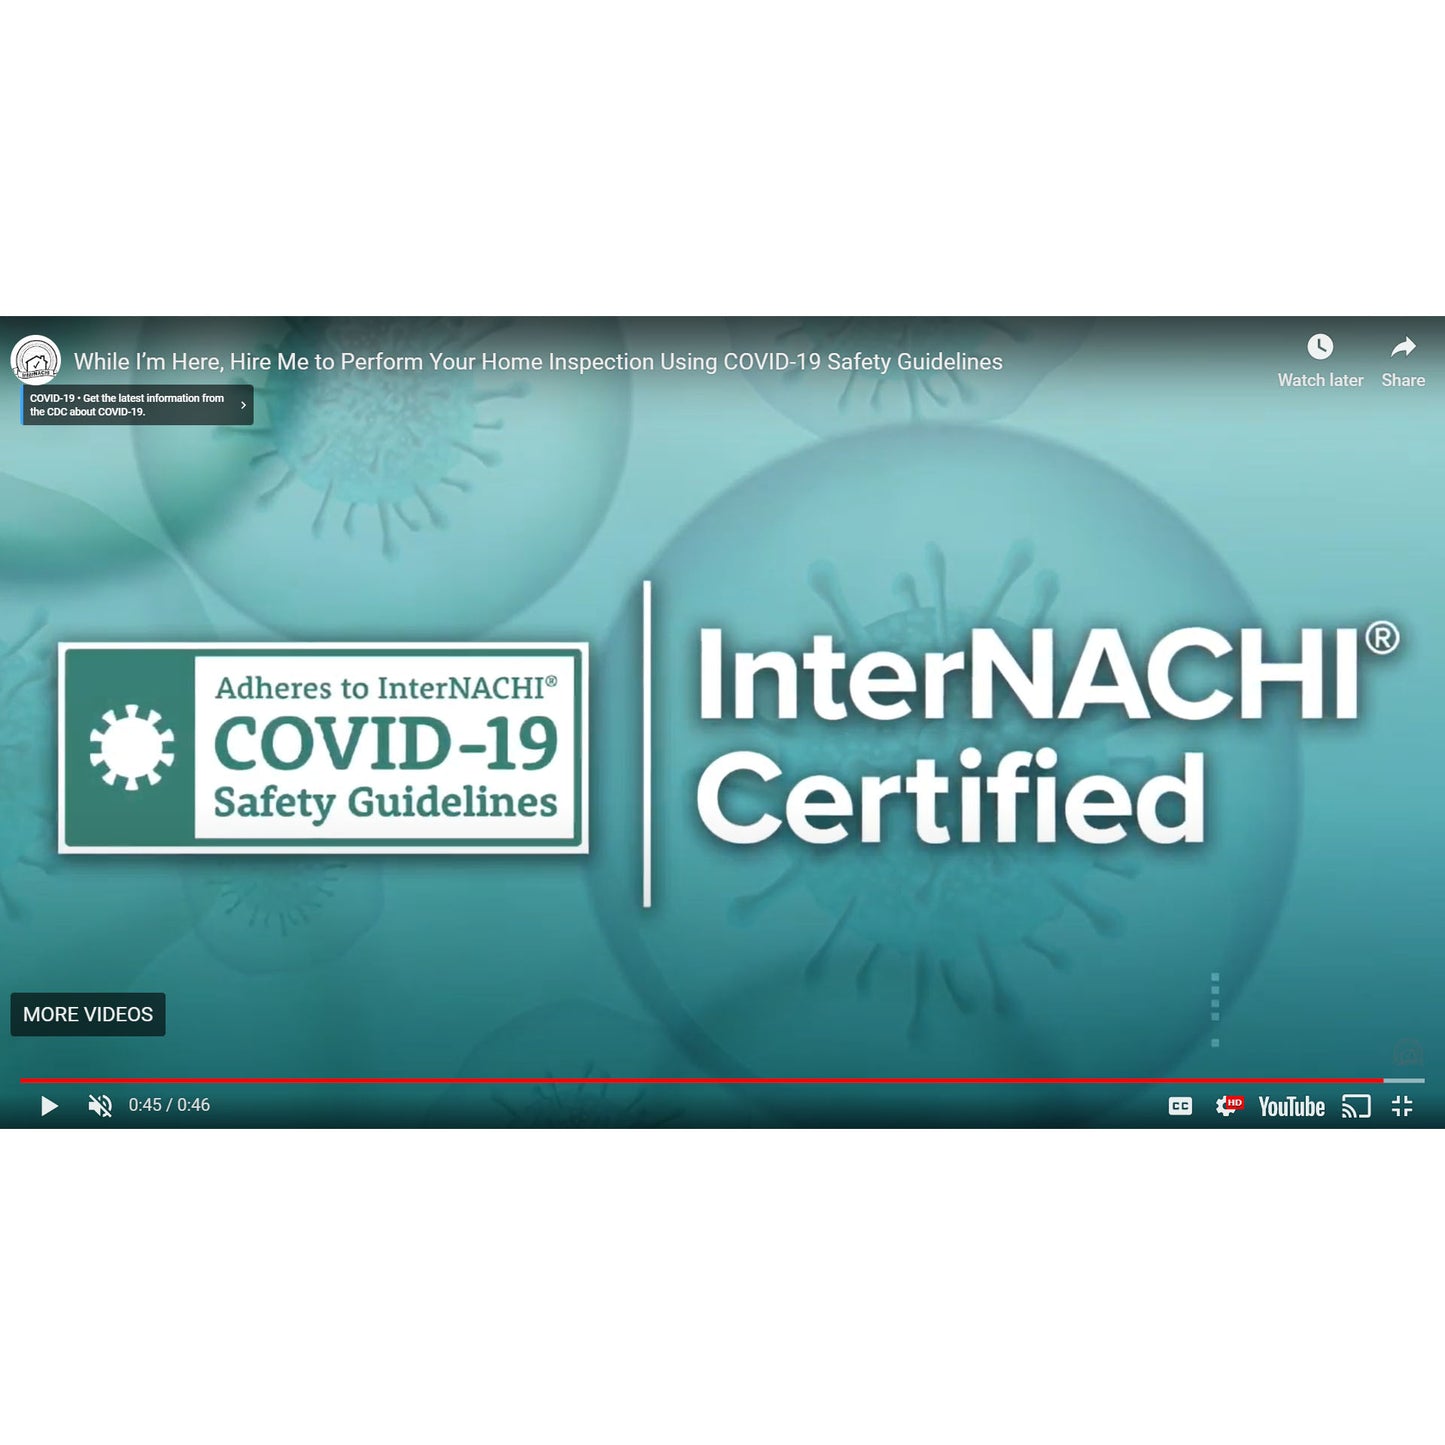 While I’m Here, Hire Me to Perform Your Home Inspection Using COVID-19 Safety Guidelines Video